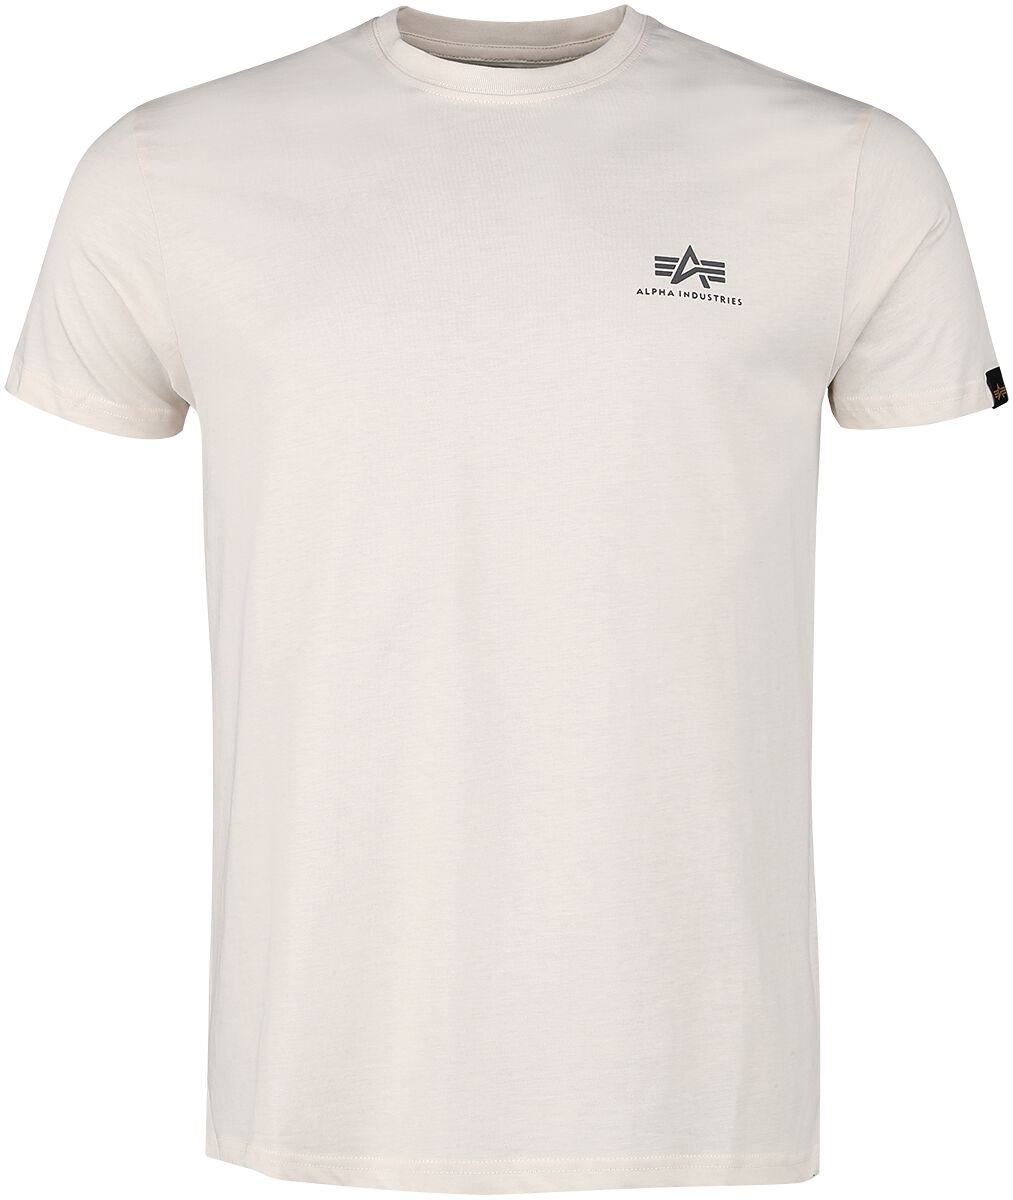 Alpha Industries Backprint T T-Shirt creme in S